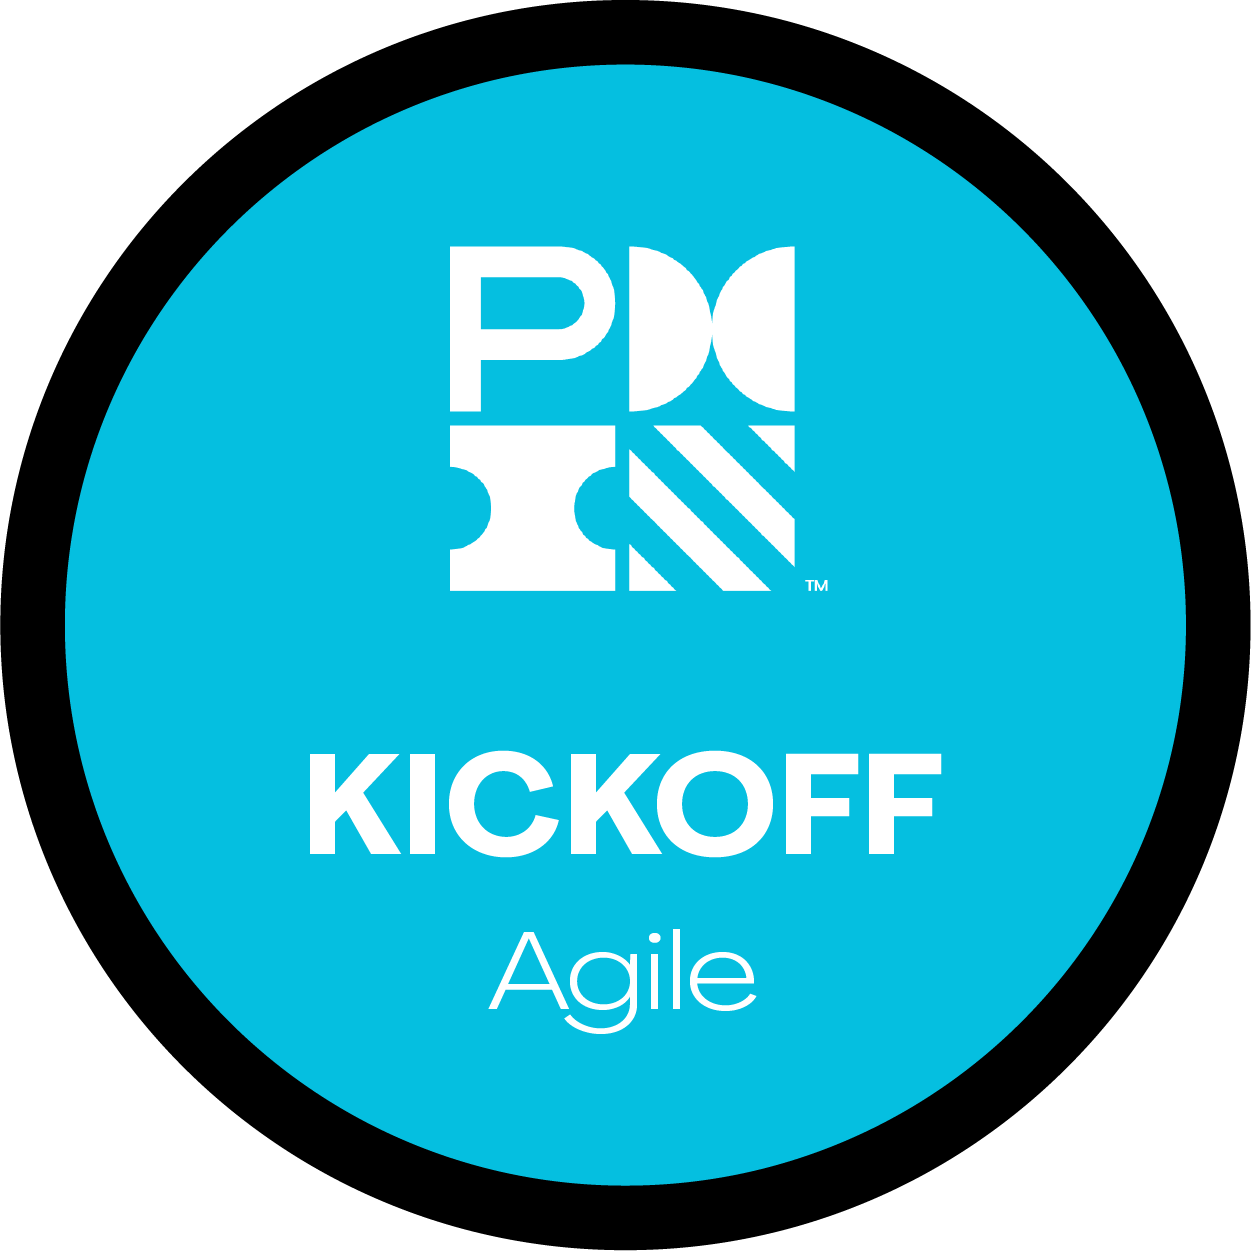 Project kickoff micro course from PMI - Agile or Waterfall 